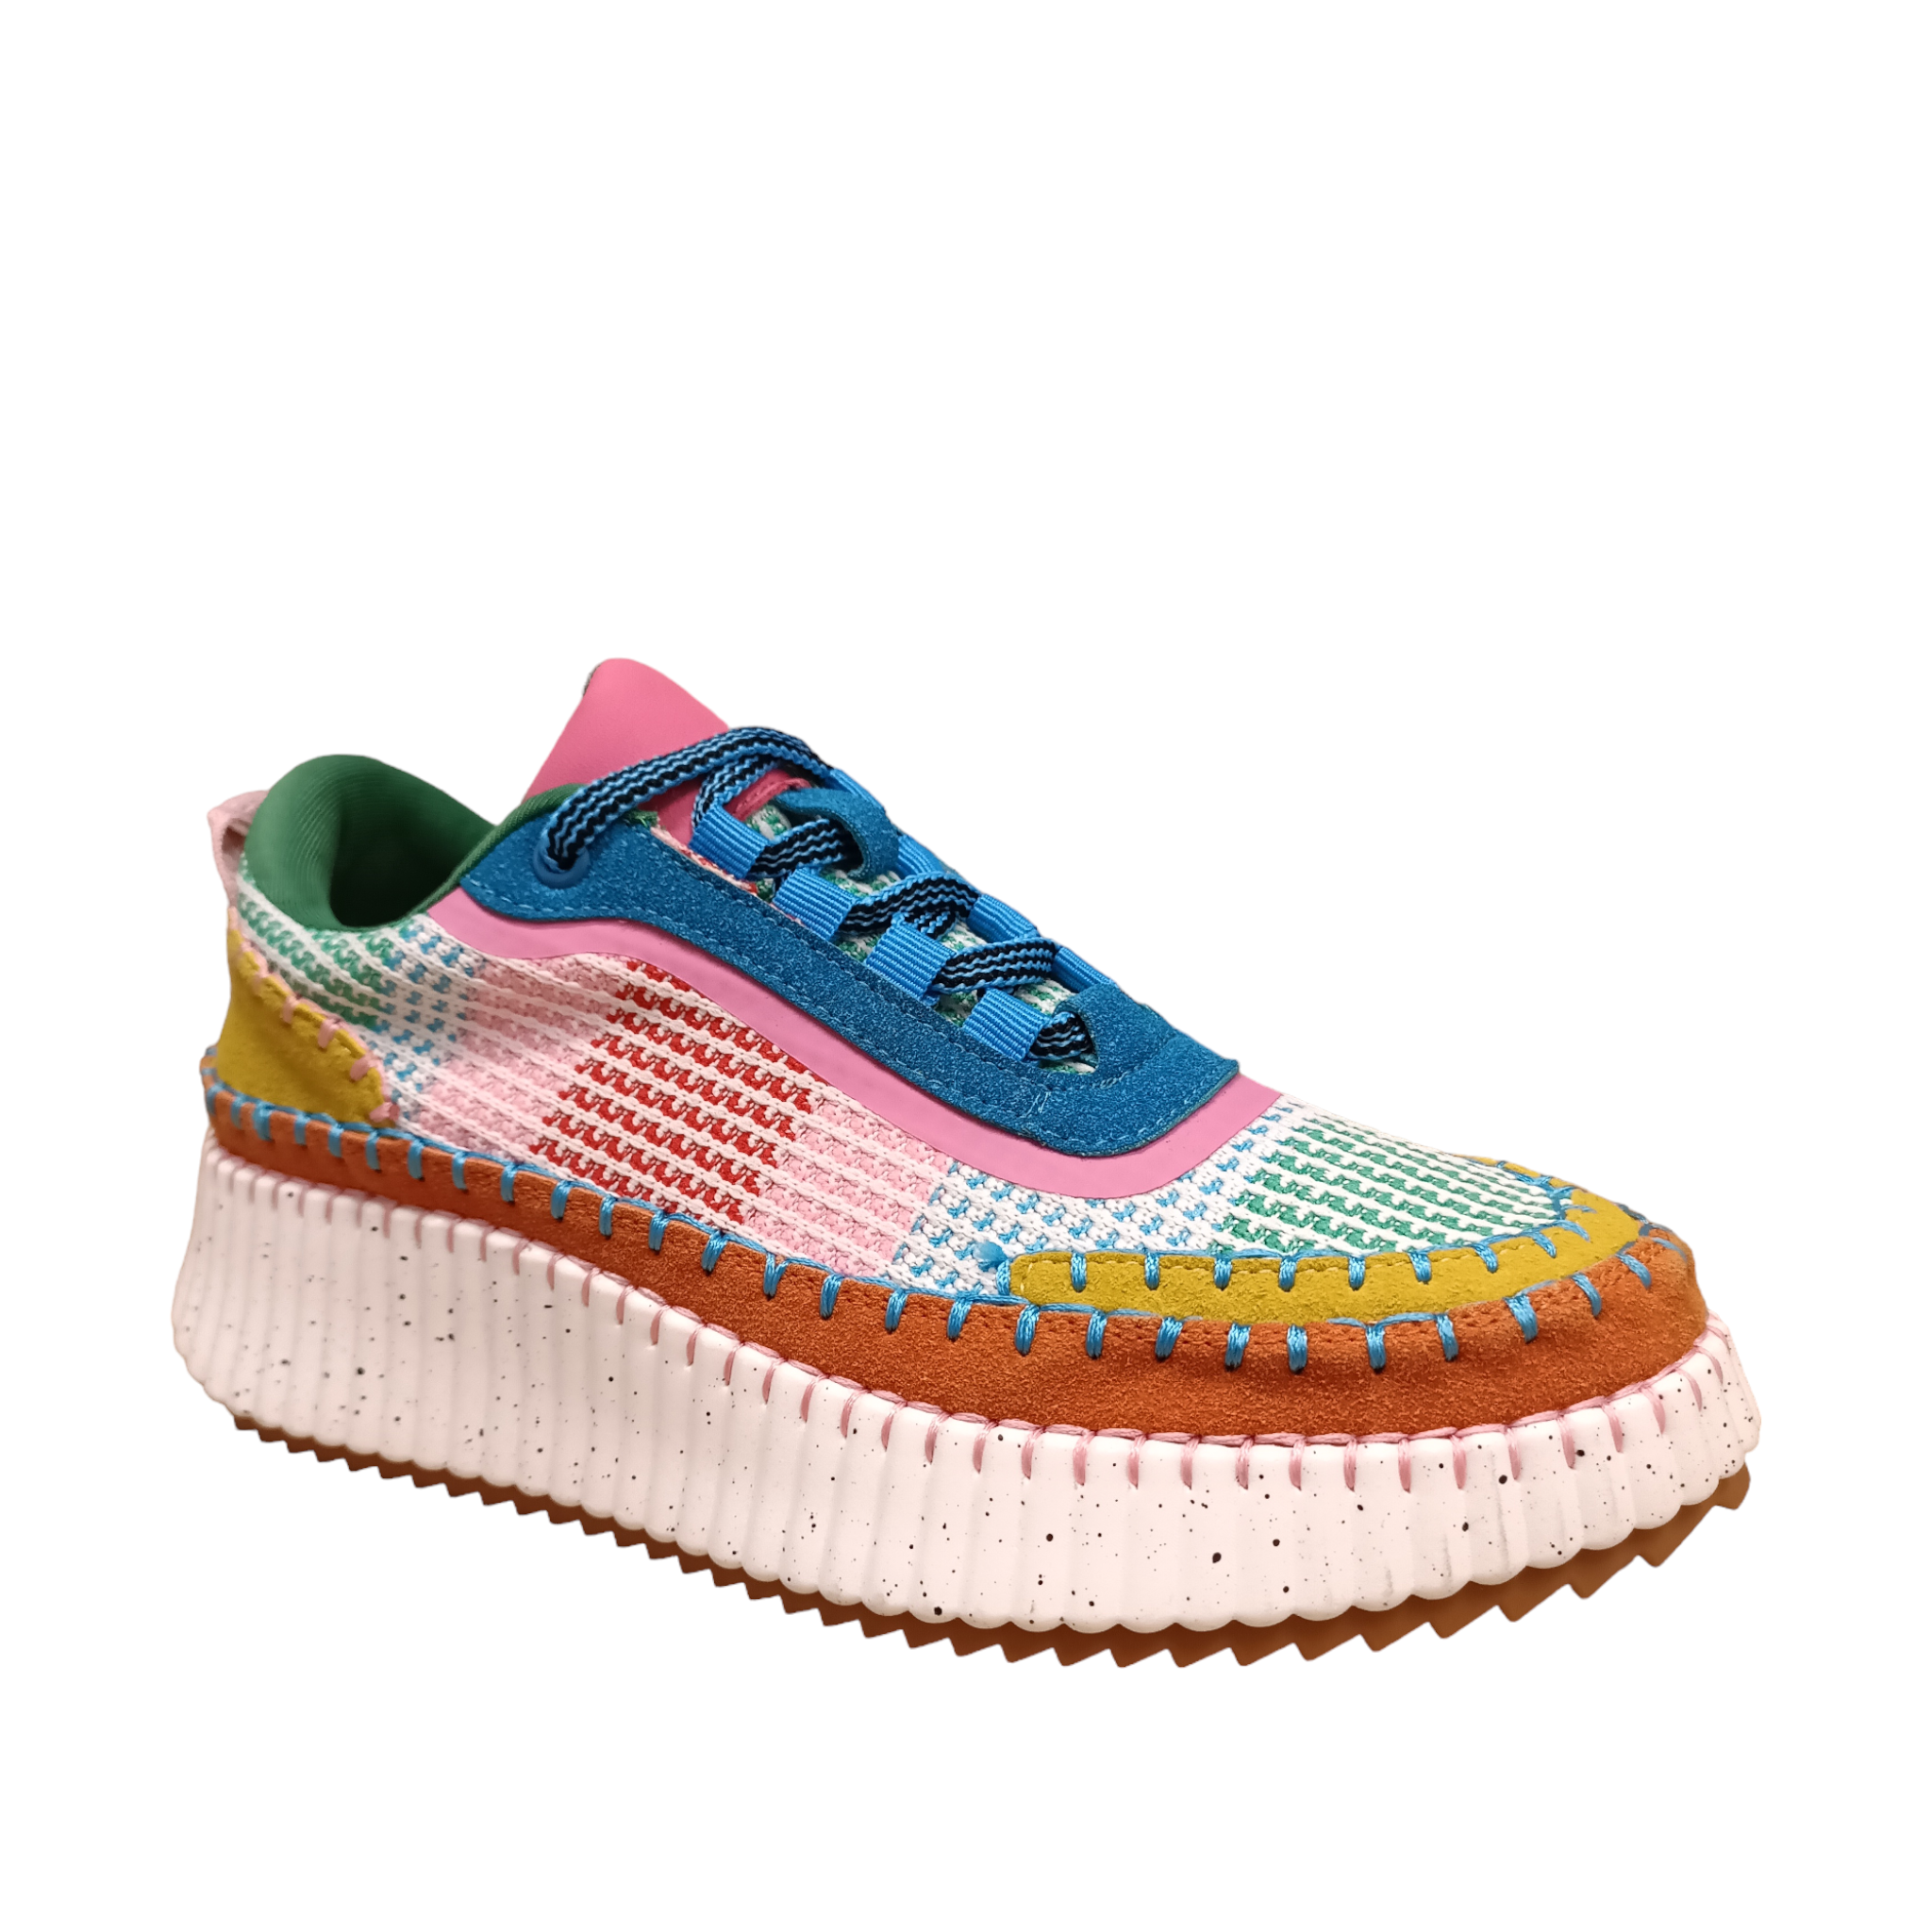 Stella from Gelato. Side angled view of shoe with visible stitching attaching orange, yellow and a multi colour material with blue around the laces. Shop with shoe&me Mount Maunganui online and in-store.